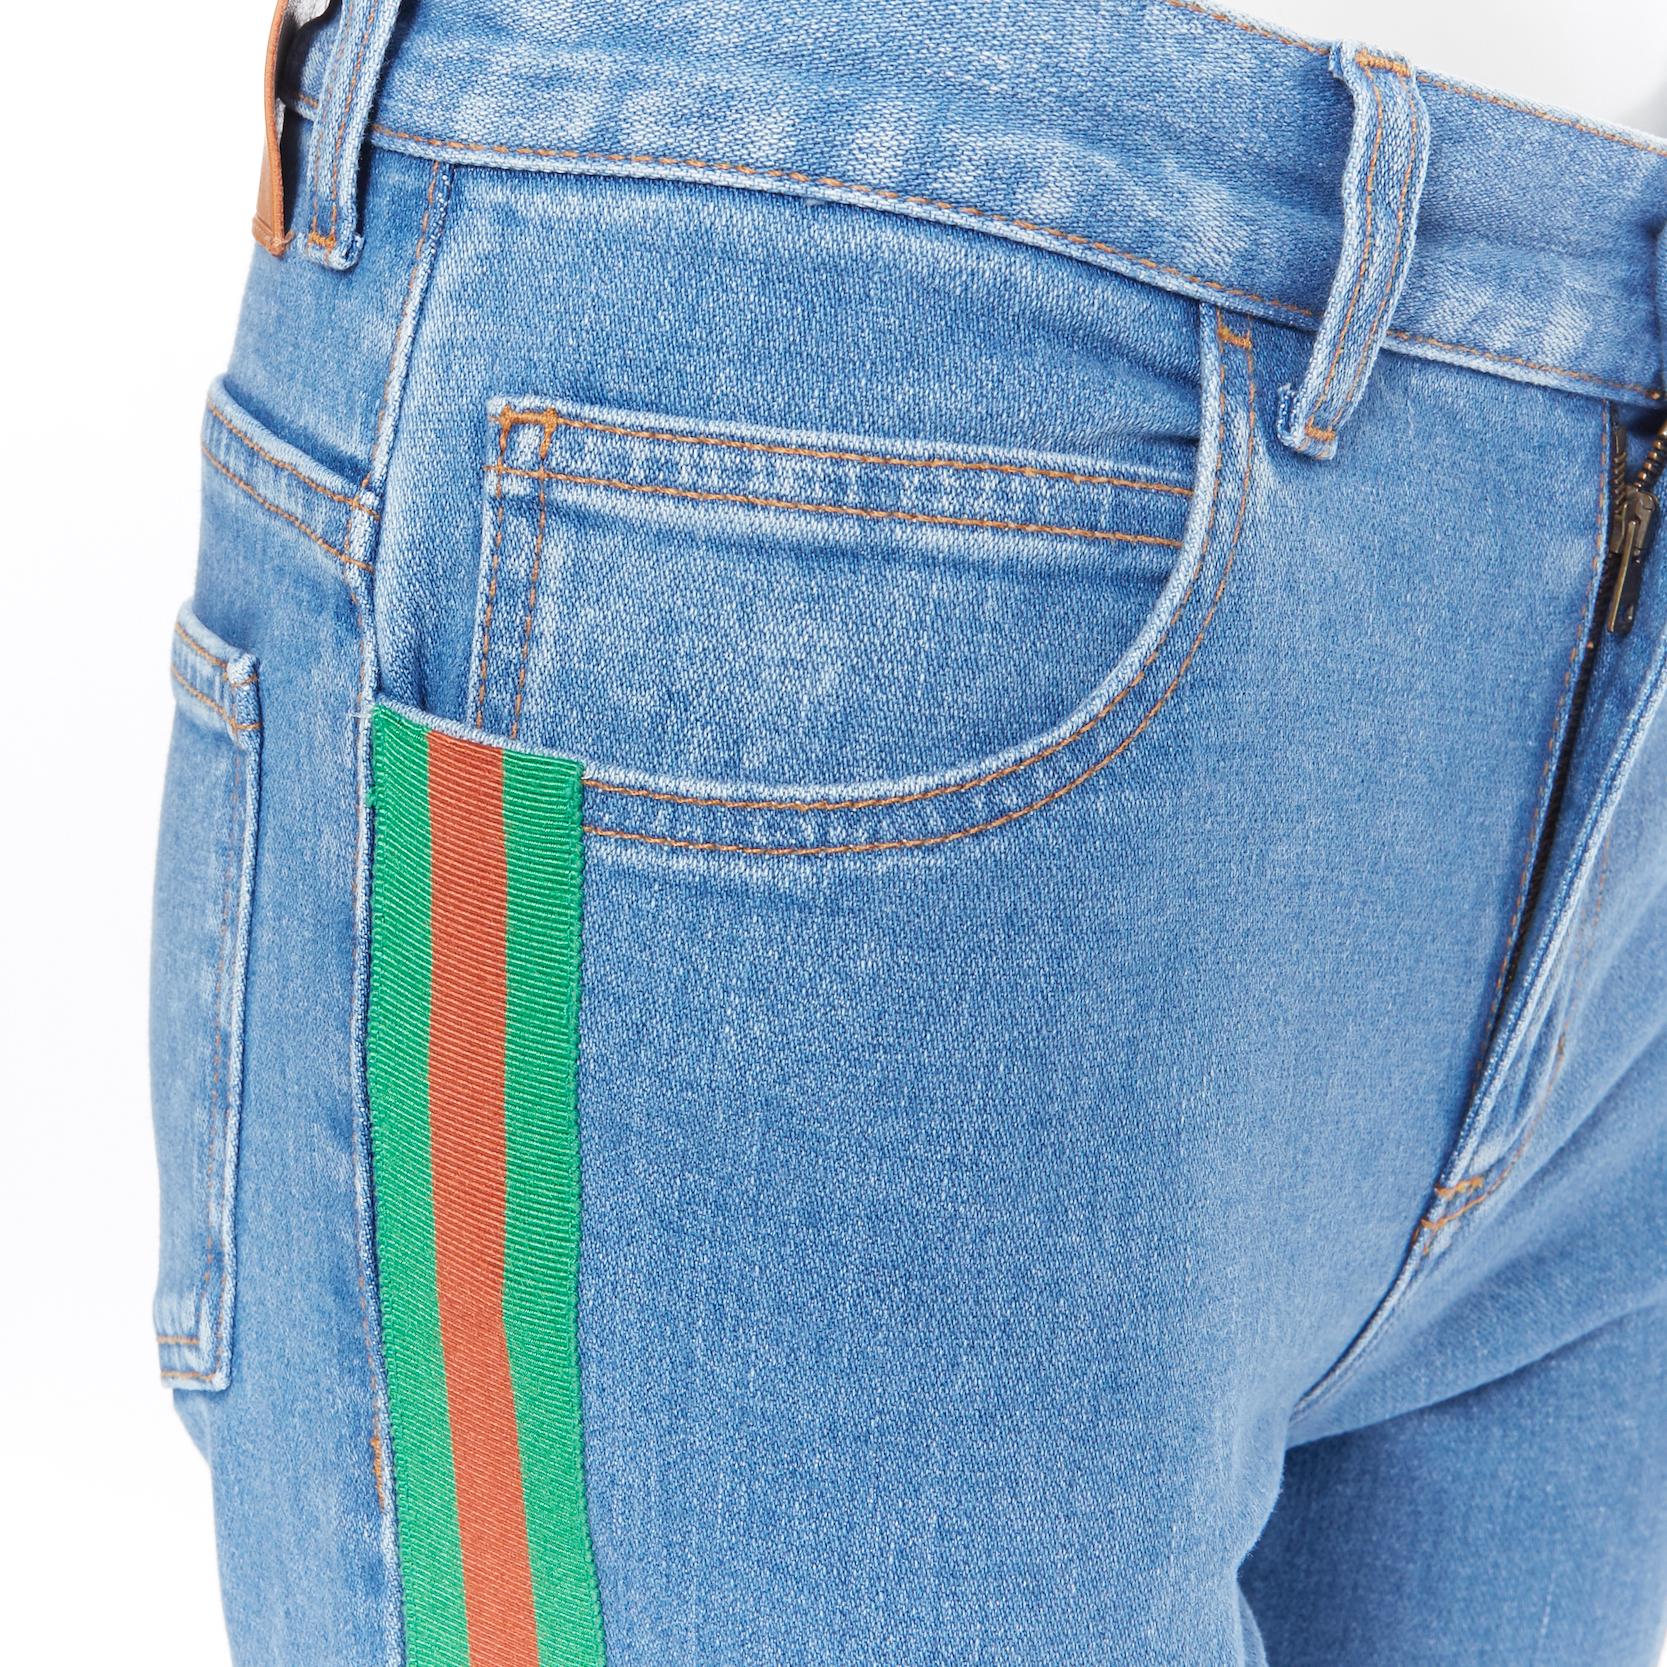 Women's GUCCI ALESSANDRO MICHELE  blue denim red green web trim 90's flared jeans 24